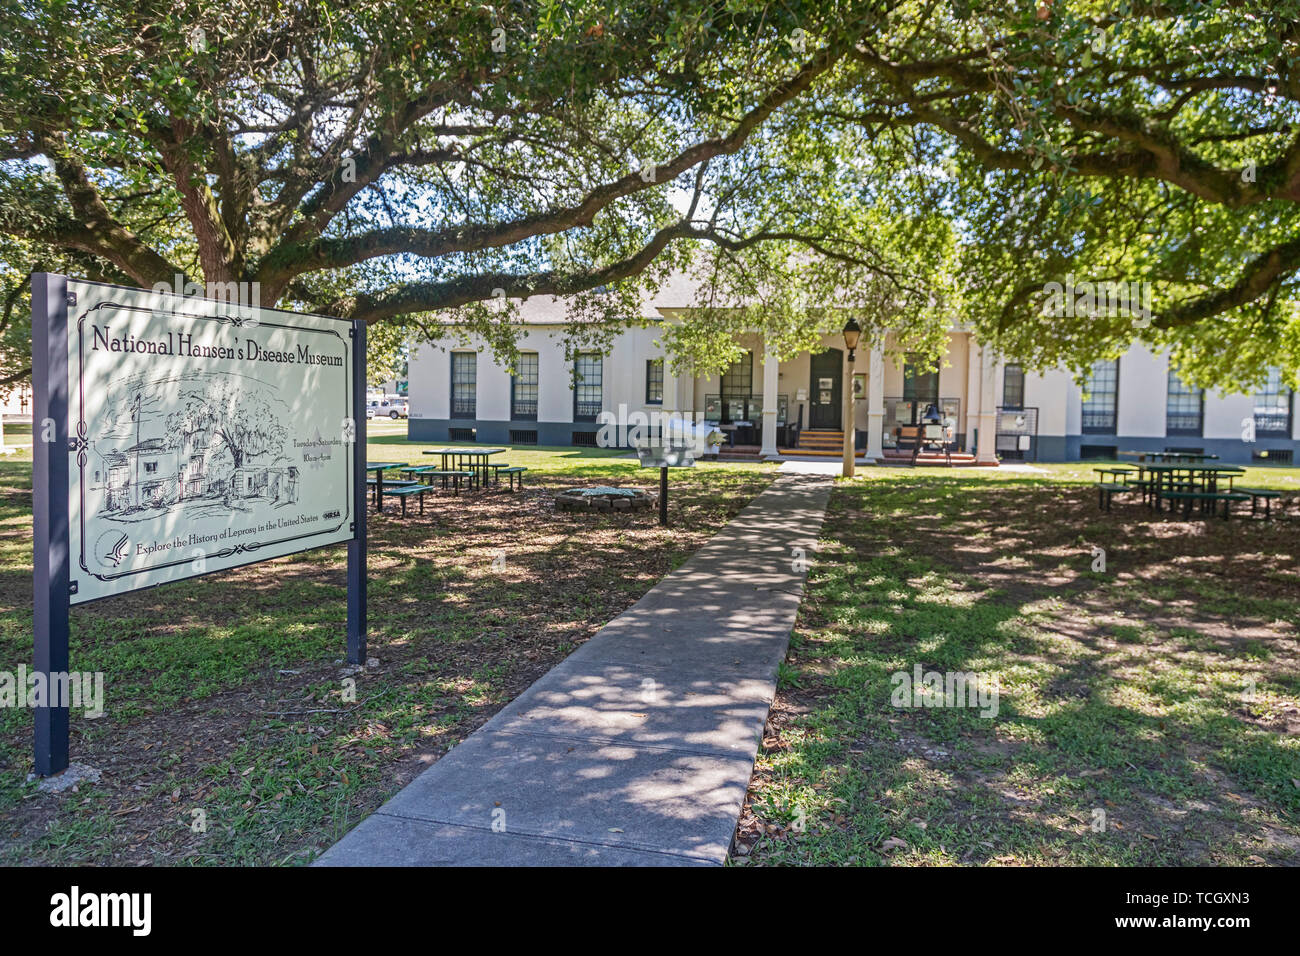 Carville, Louisiana - The National Hansen's Disease Museum. Once a facility where people with Hansen's Disease (leprosy) were quarantined for life, it Stock Photo